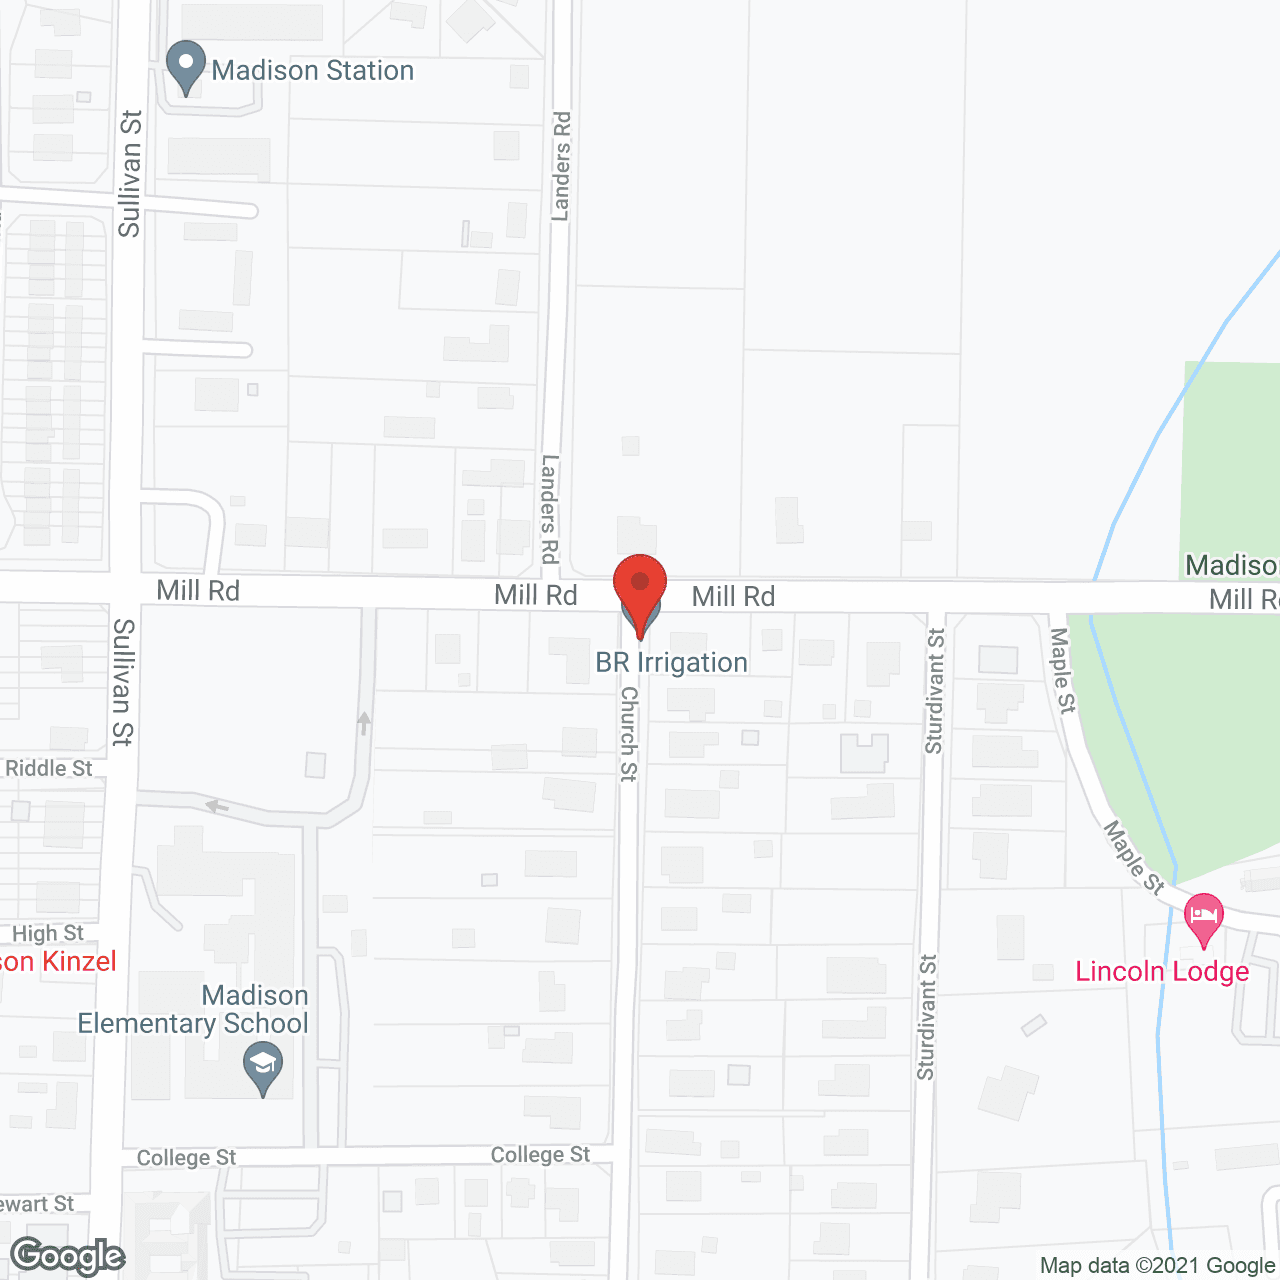 The Madison Village in google map